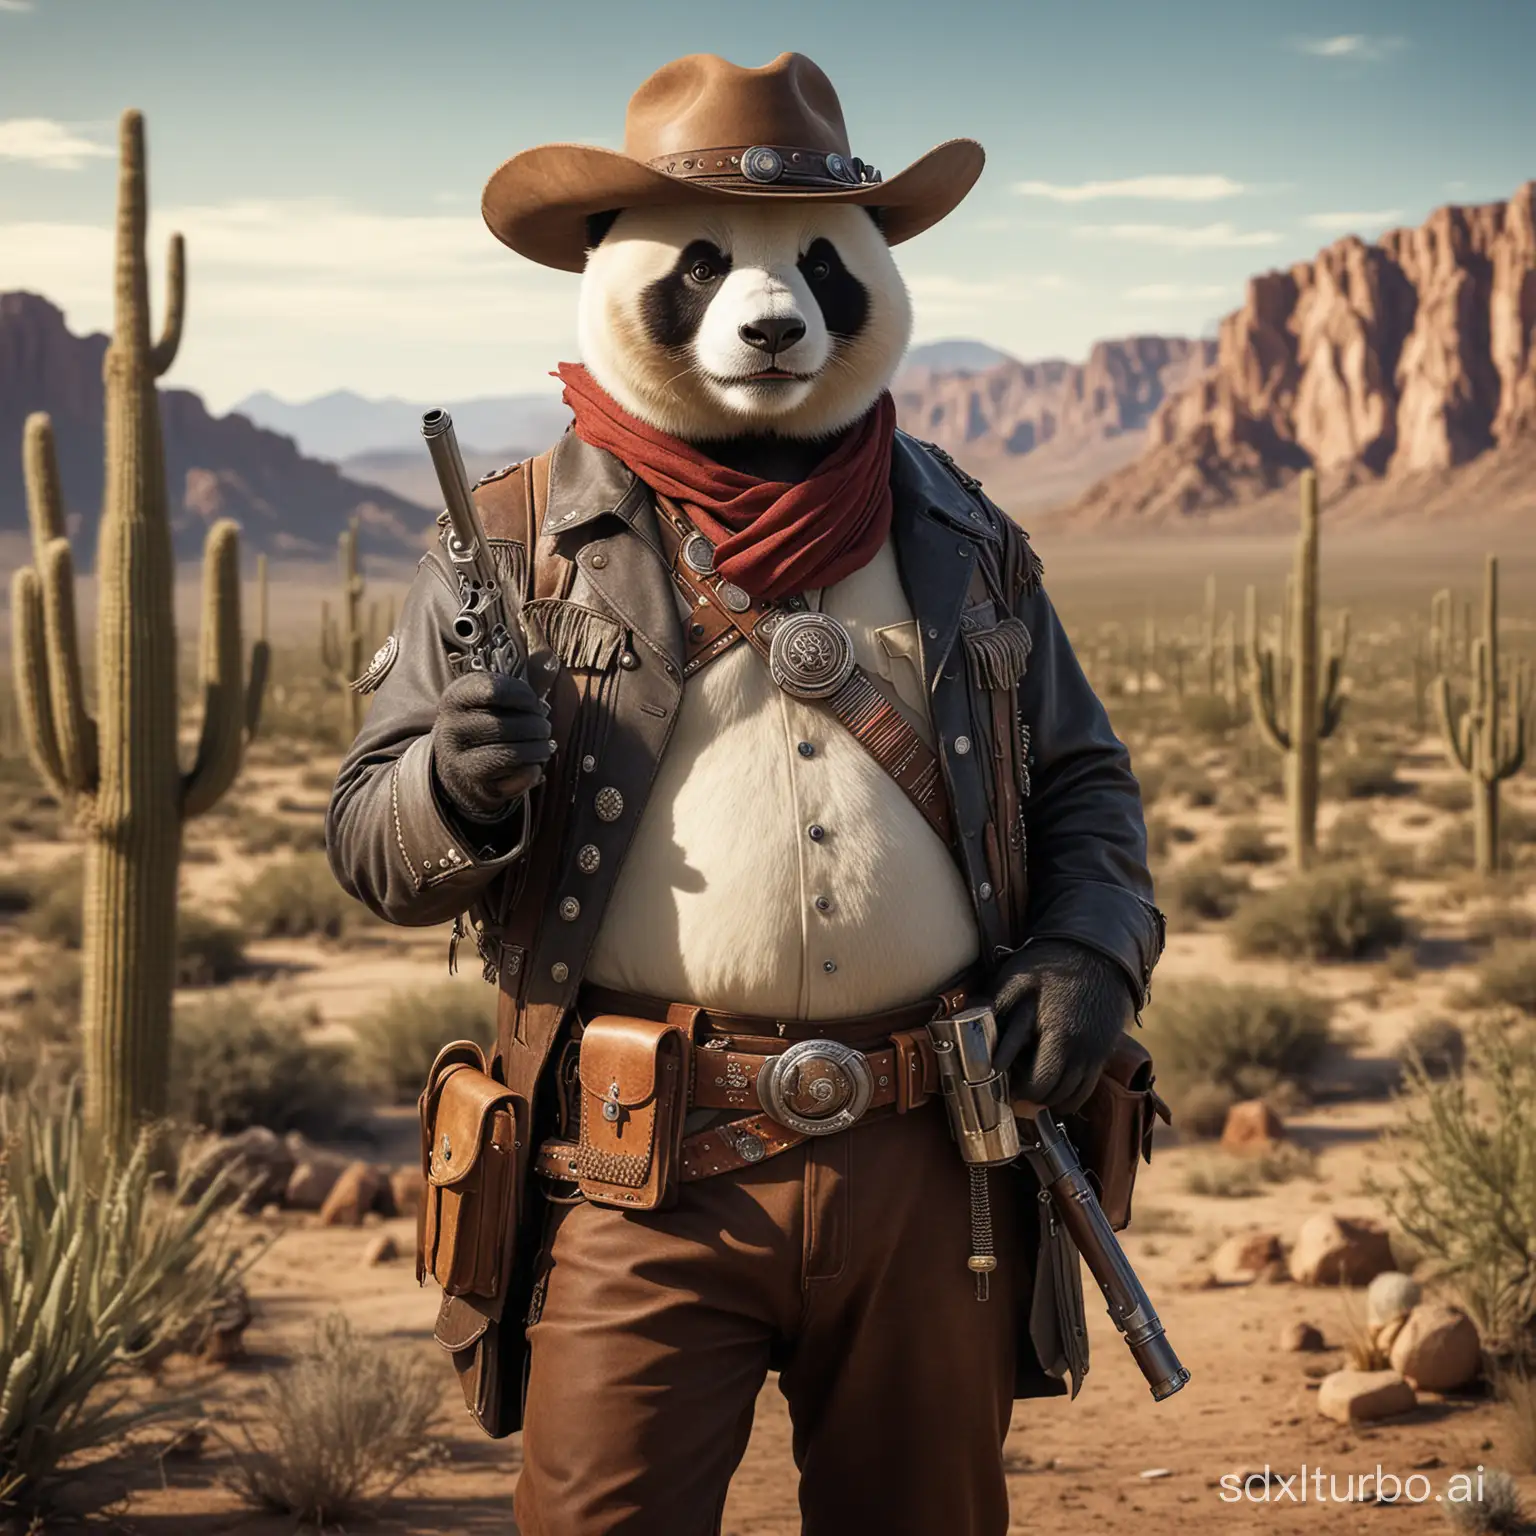 Panda Gunslinger, a panda dressed in cowboy attire, Western wilderness survival outfit, with a lit cigar in its mouth, two long-barreled revolvers holstered on its waist, background is a desert landscape with several cacti.